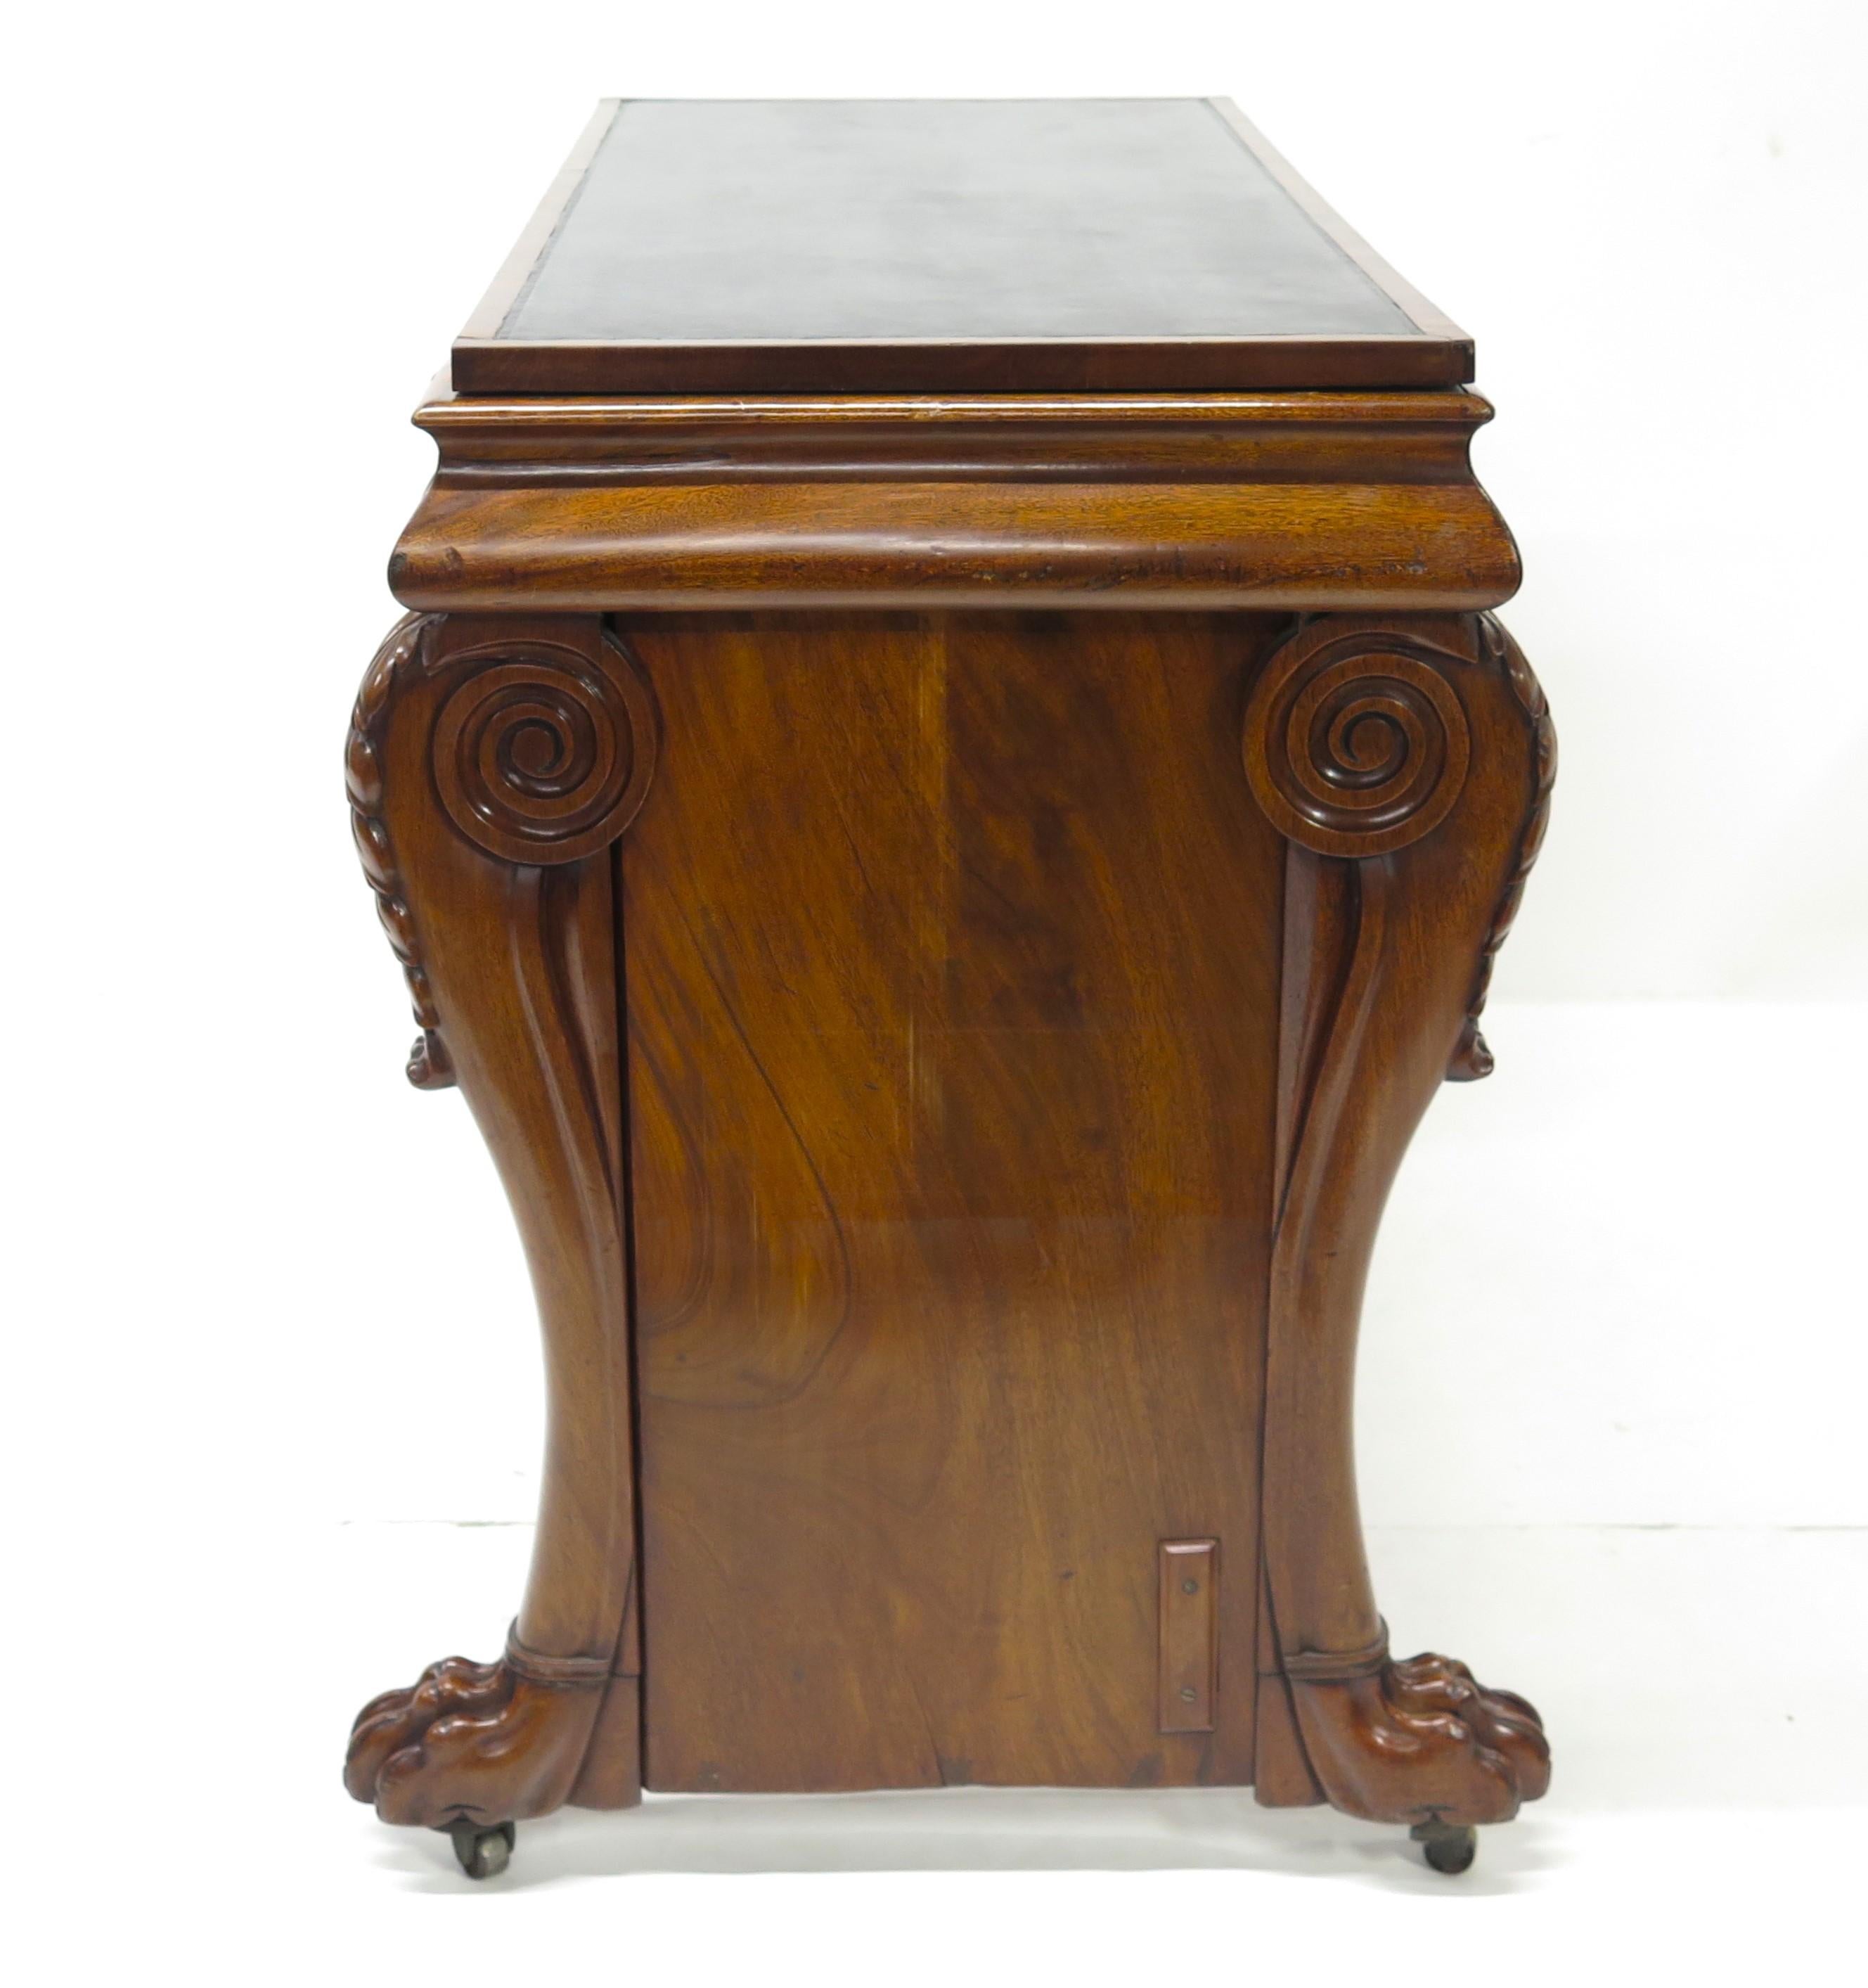 Hand-Crafted William IV Mahogany Stretcher Based Library Table with Black Leather Top For Sale